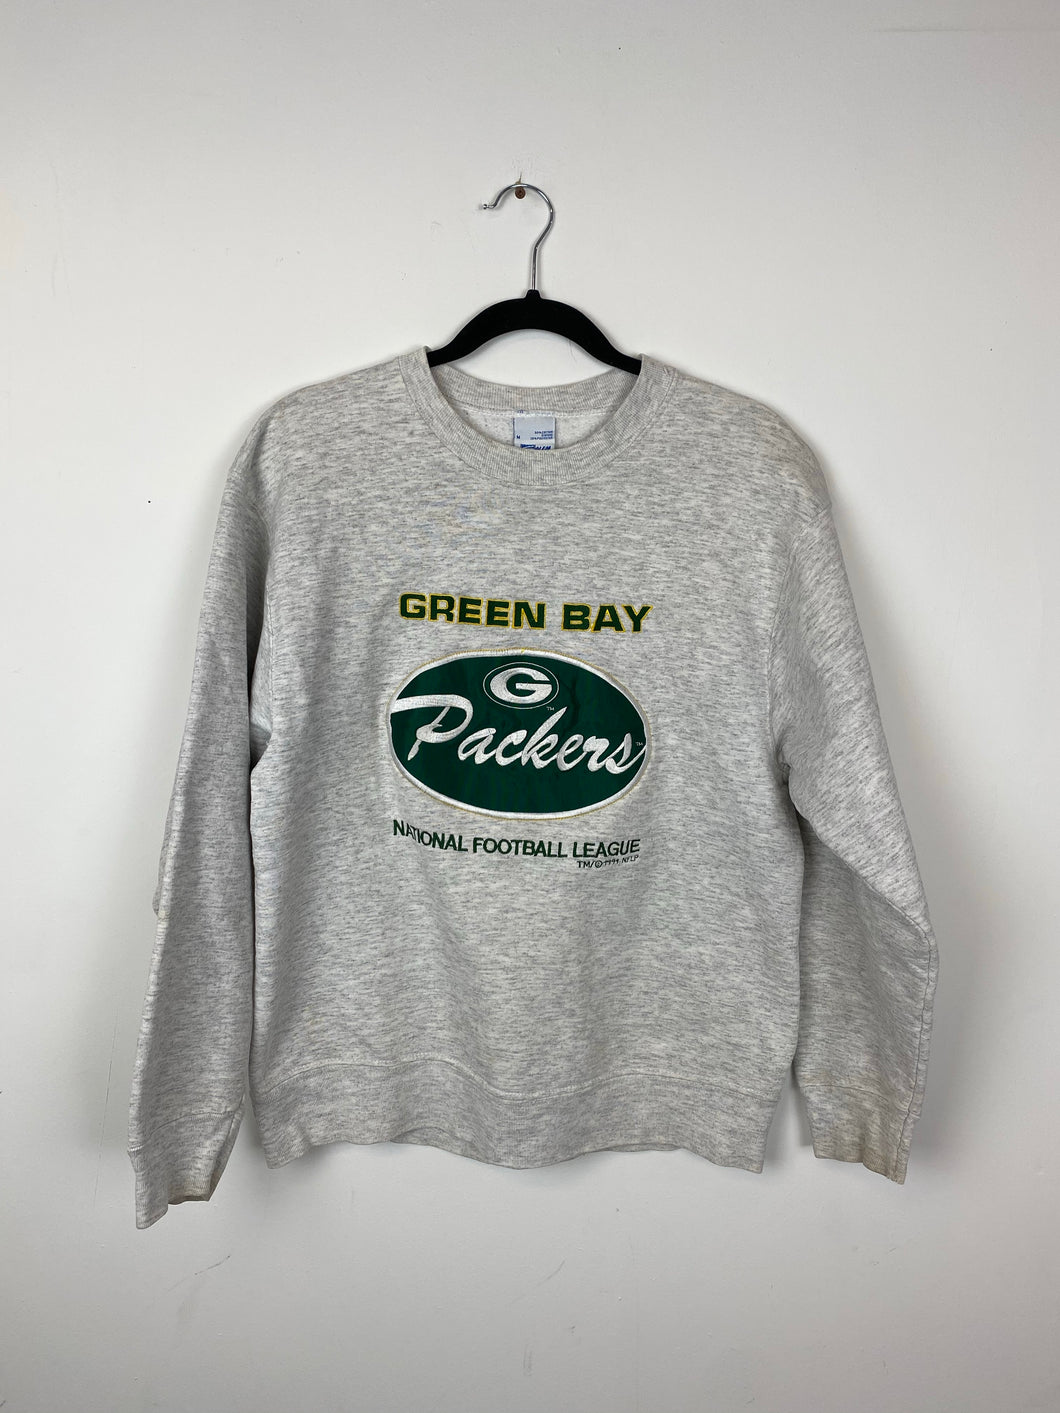 1990s embroidered Green Bay Packers crewneck